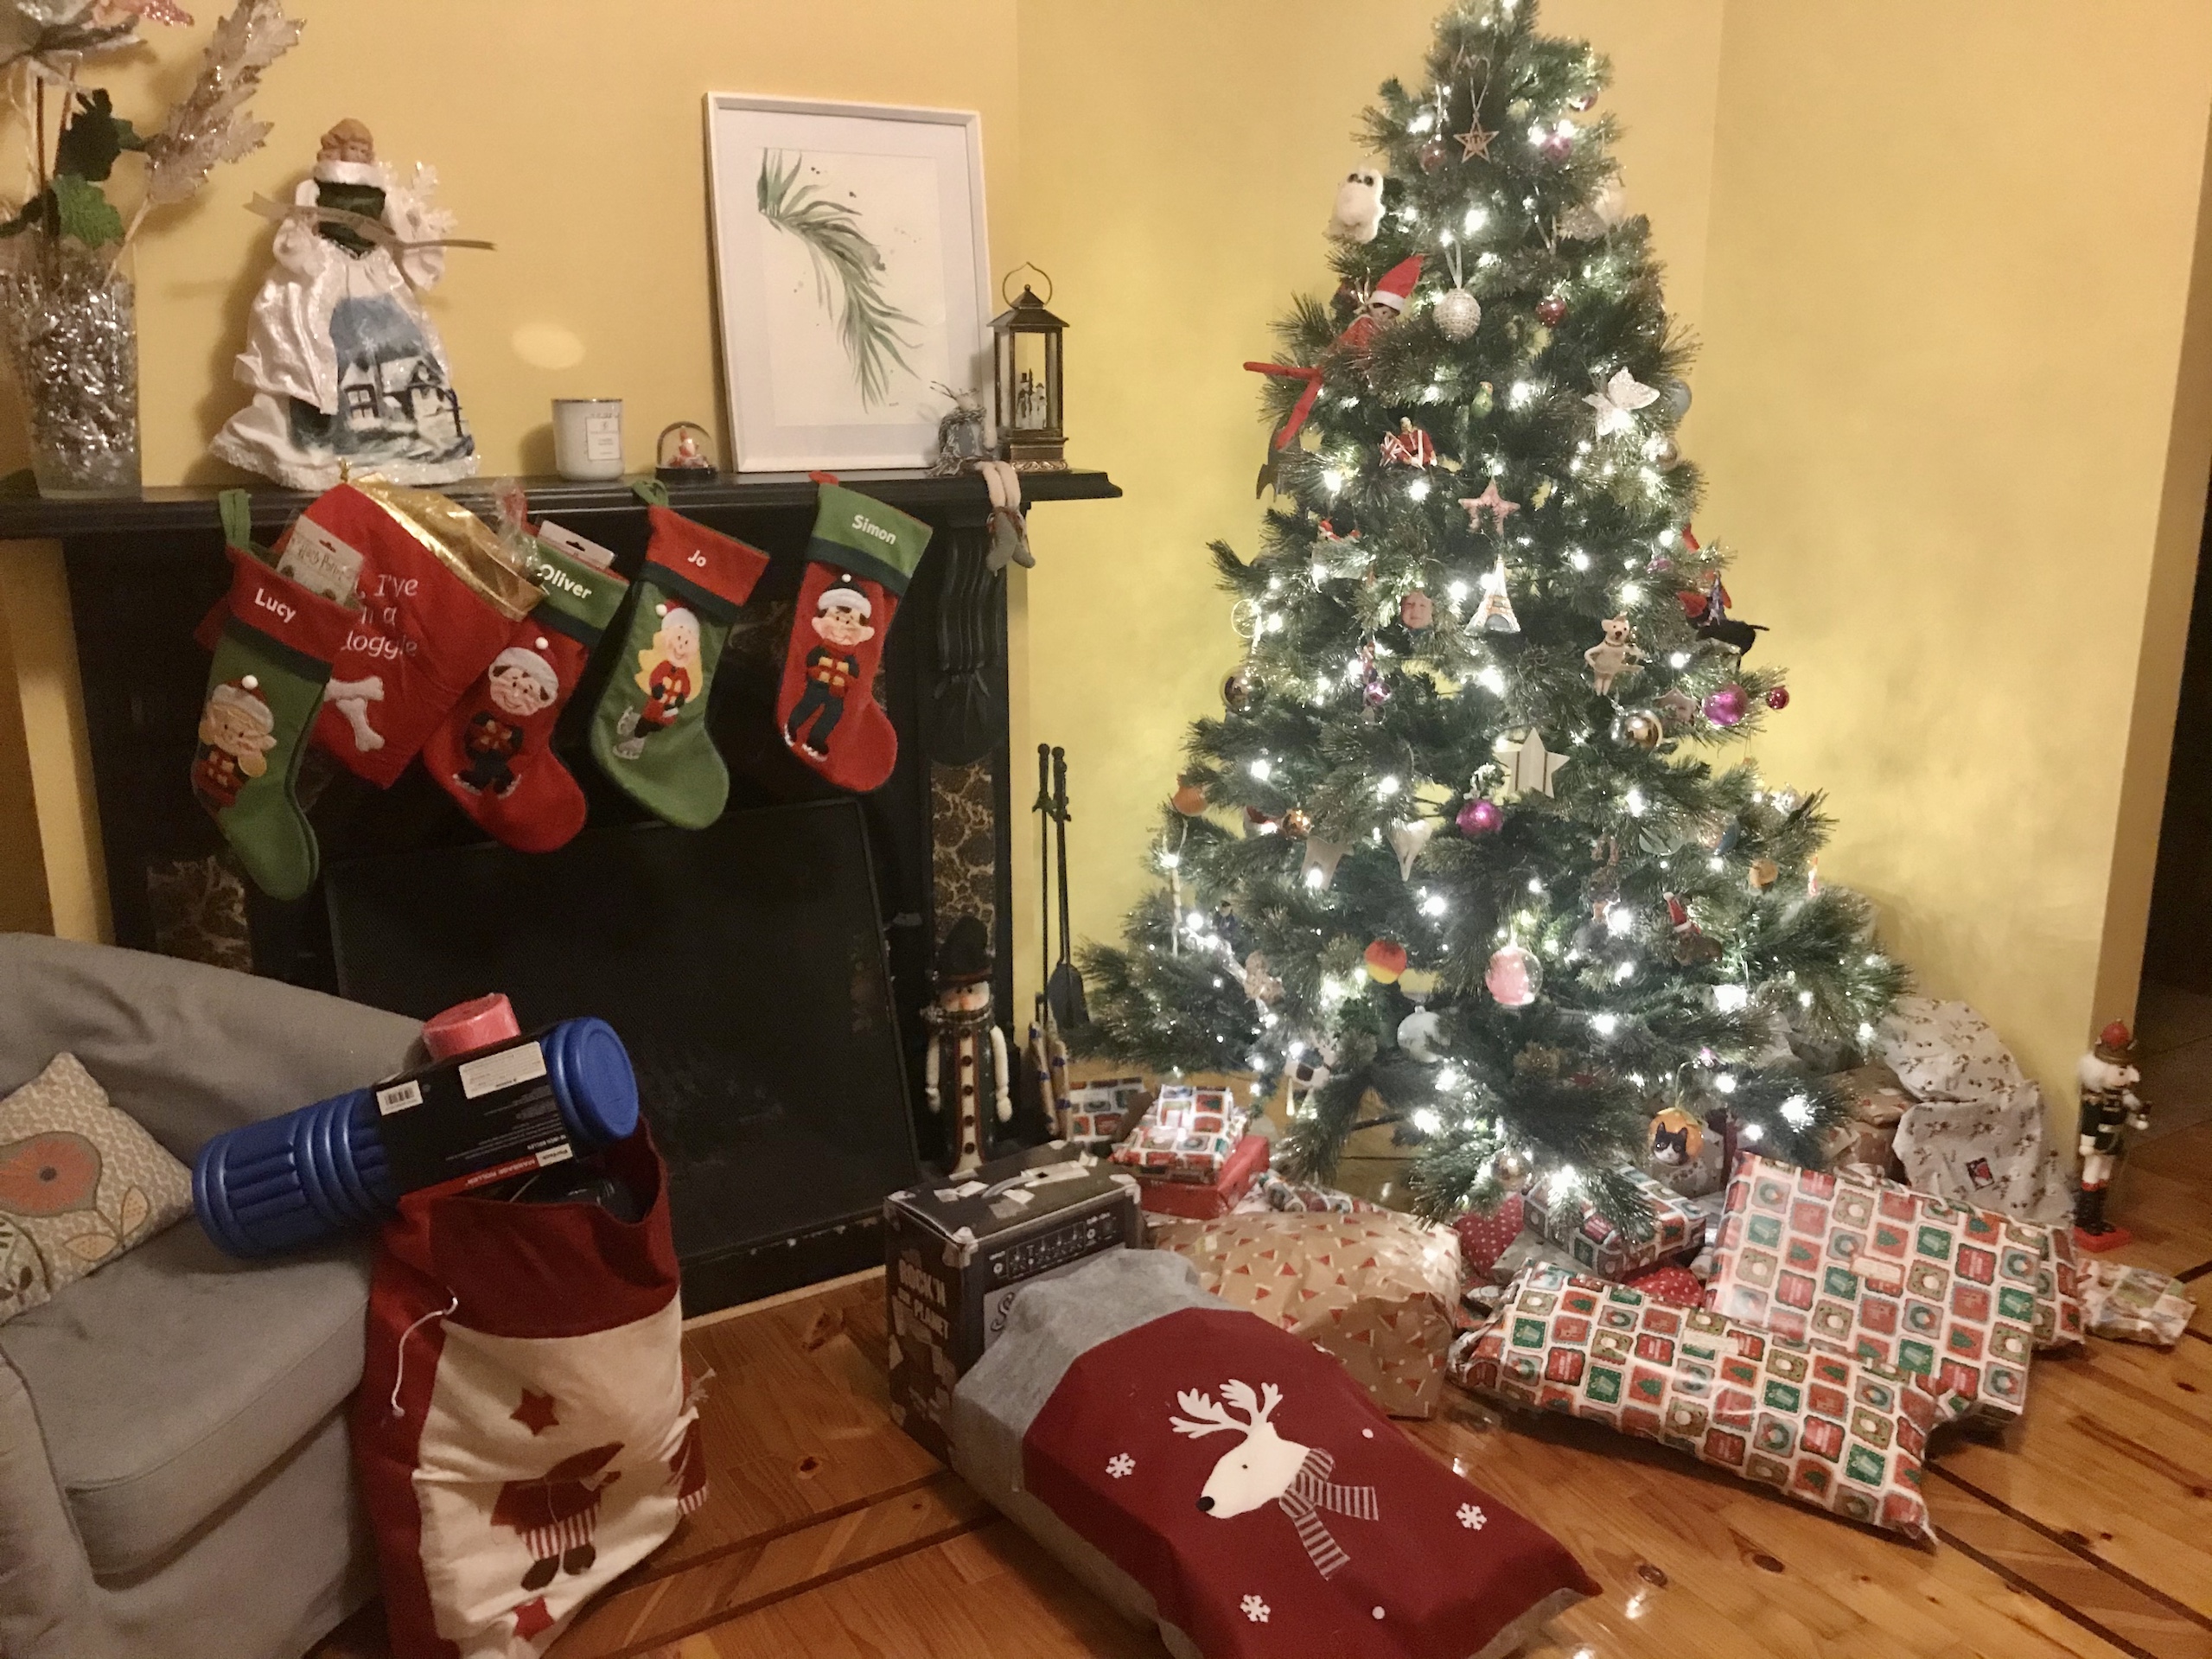 Twas the night before Christmas – my version